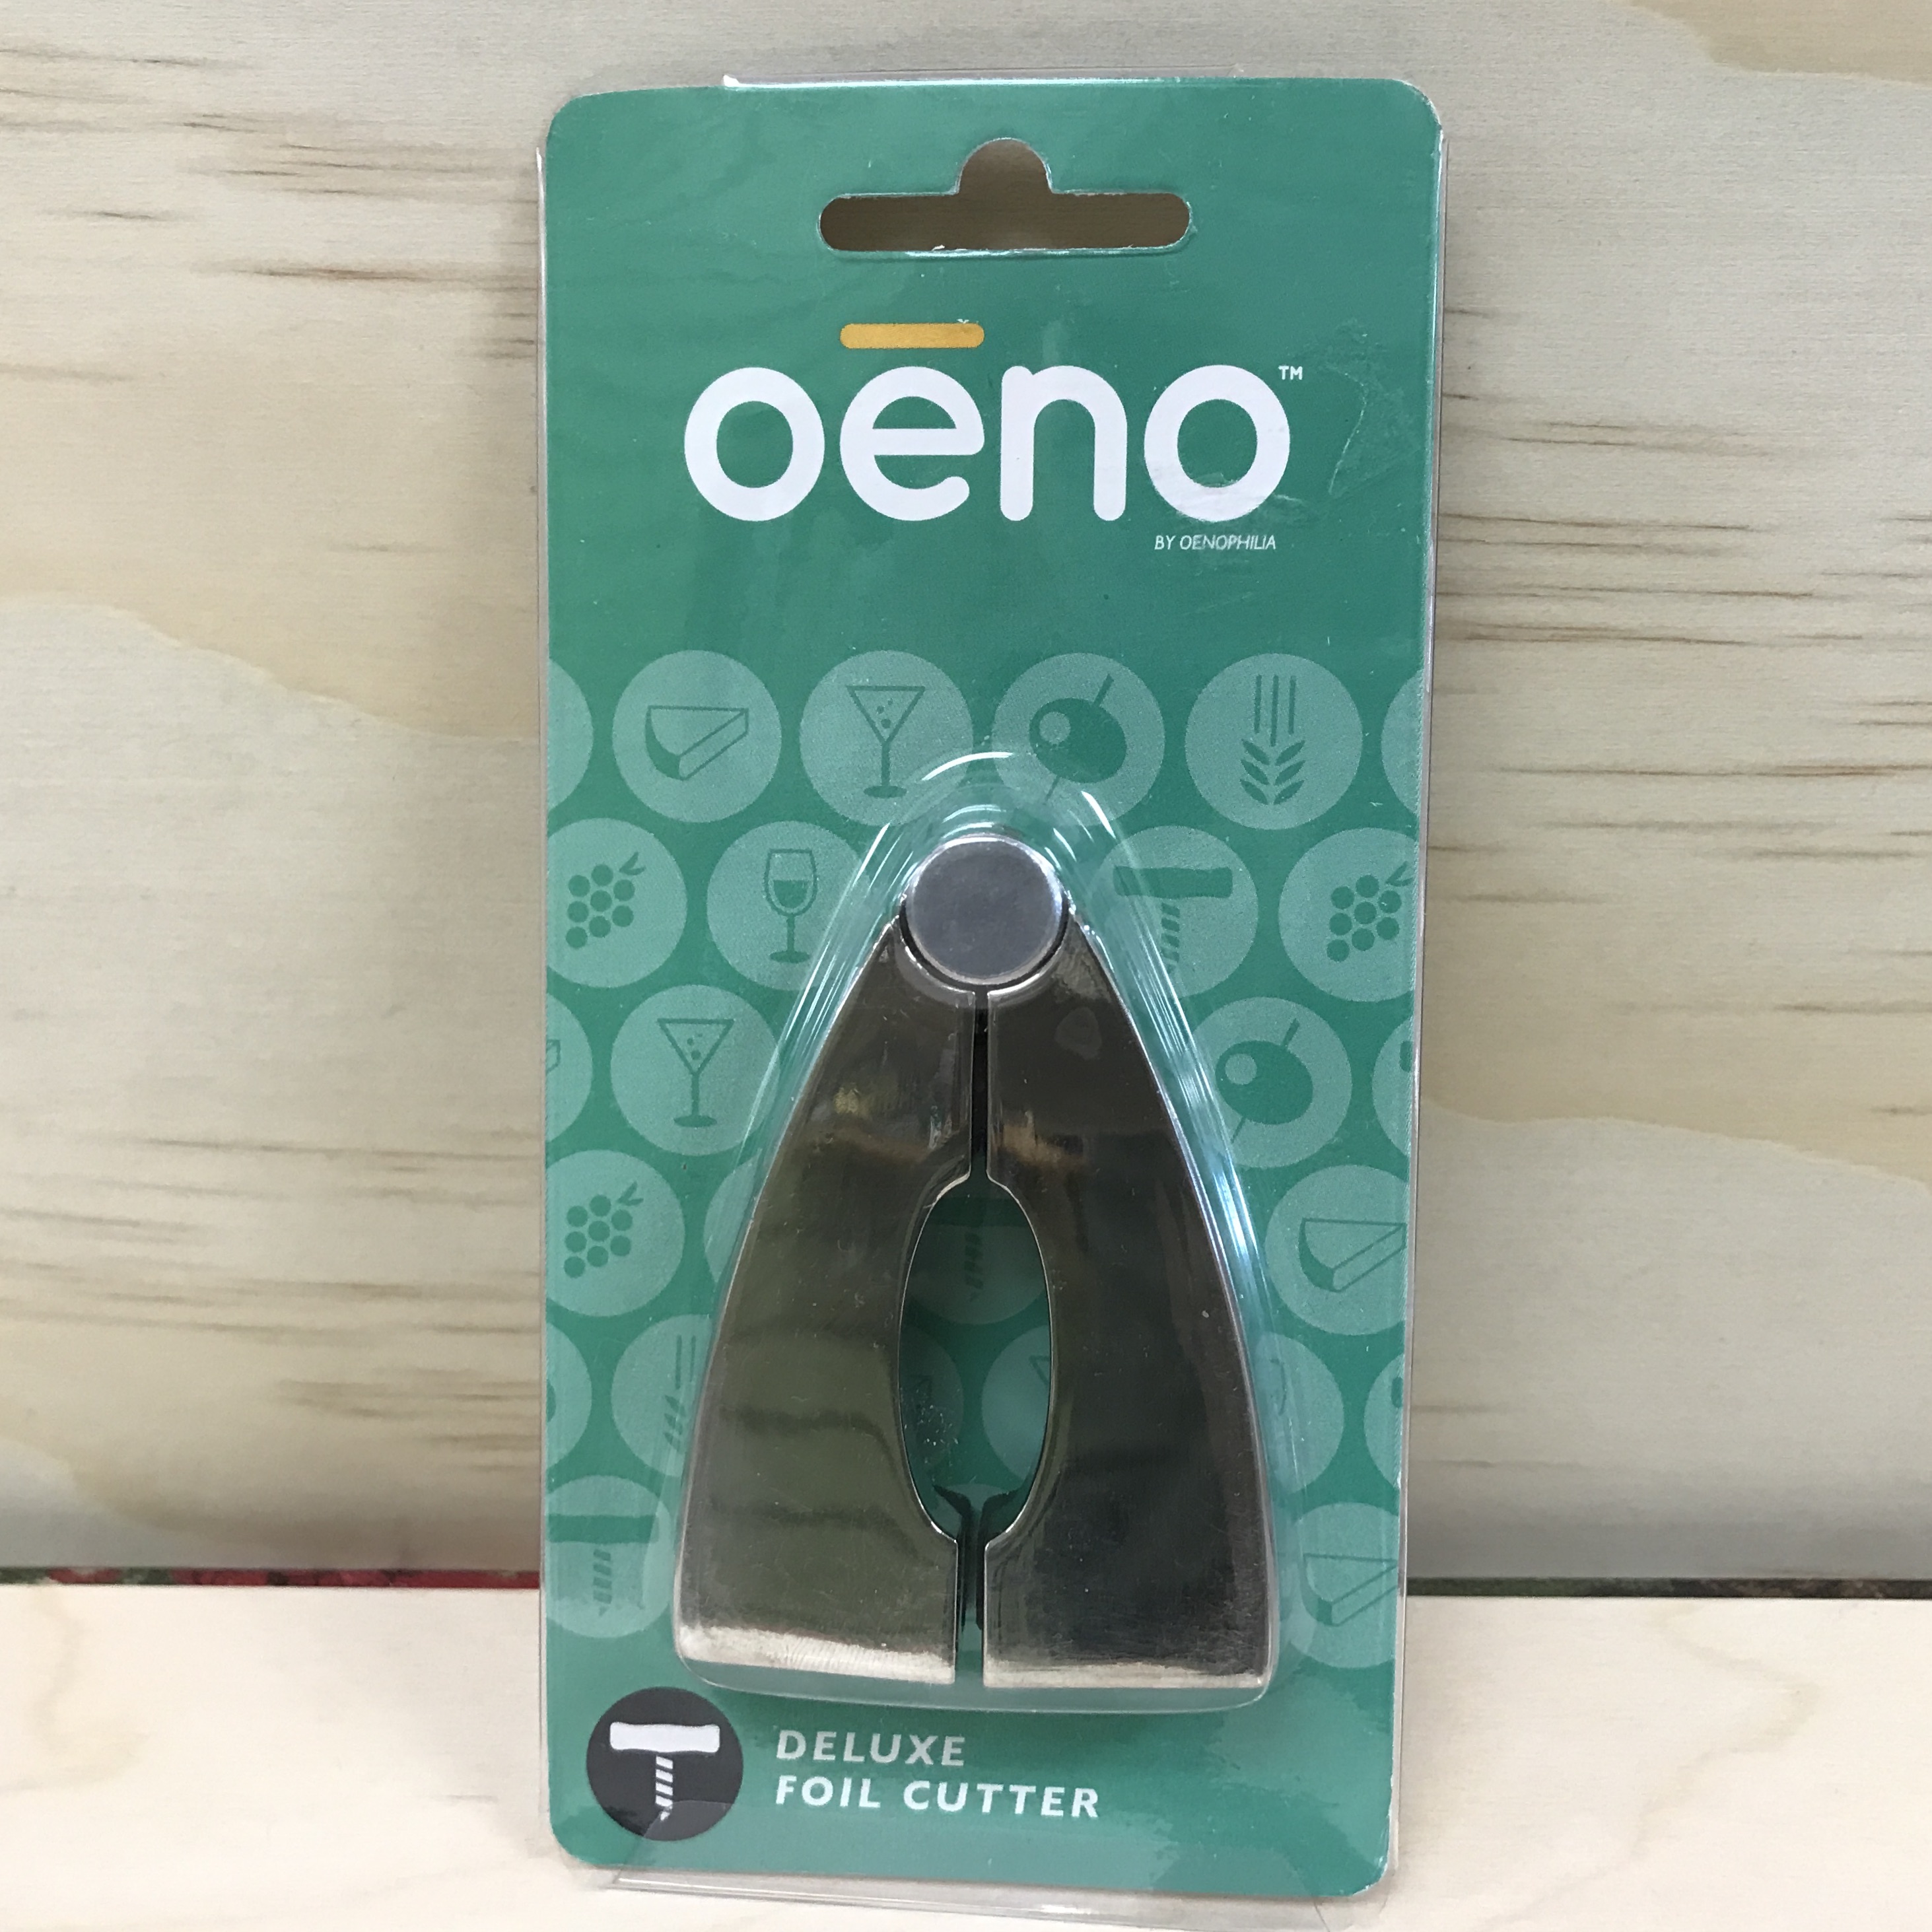 Oenophilia Deluxe Foil Cutter